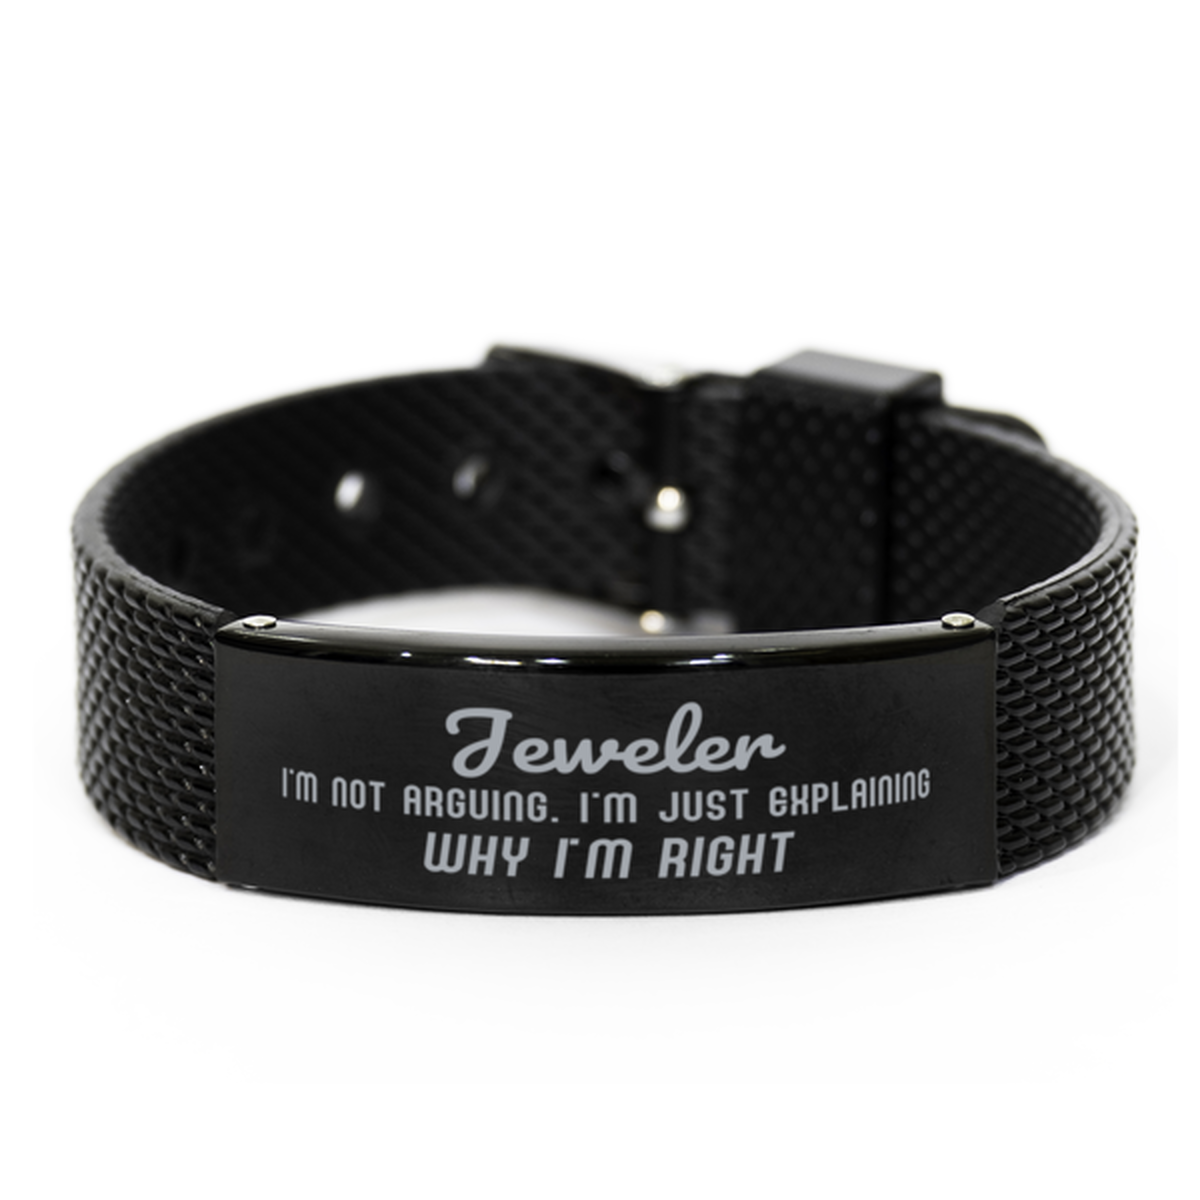 Jeweler I'm not Arguing. I'm Just Explaining Why I'm RIGHT Black Shark Mesh Bracelet, Funny Saying Quote Jeweler Gifts For Jeweler Graduation Birthday Christmas Gifts for Men Women Coworker